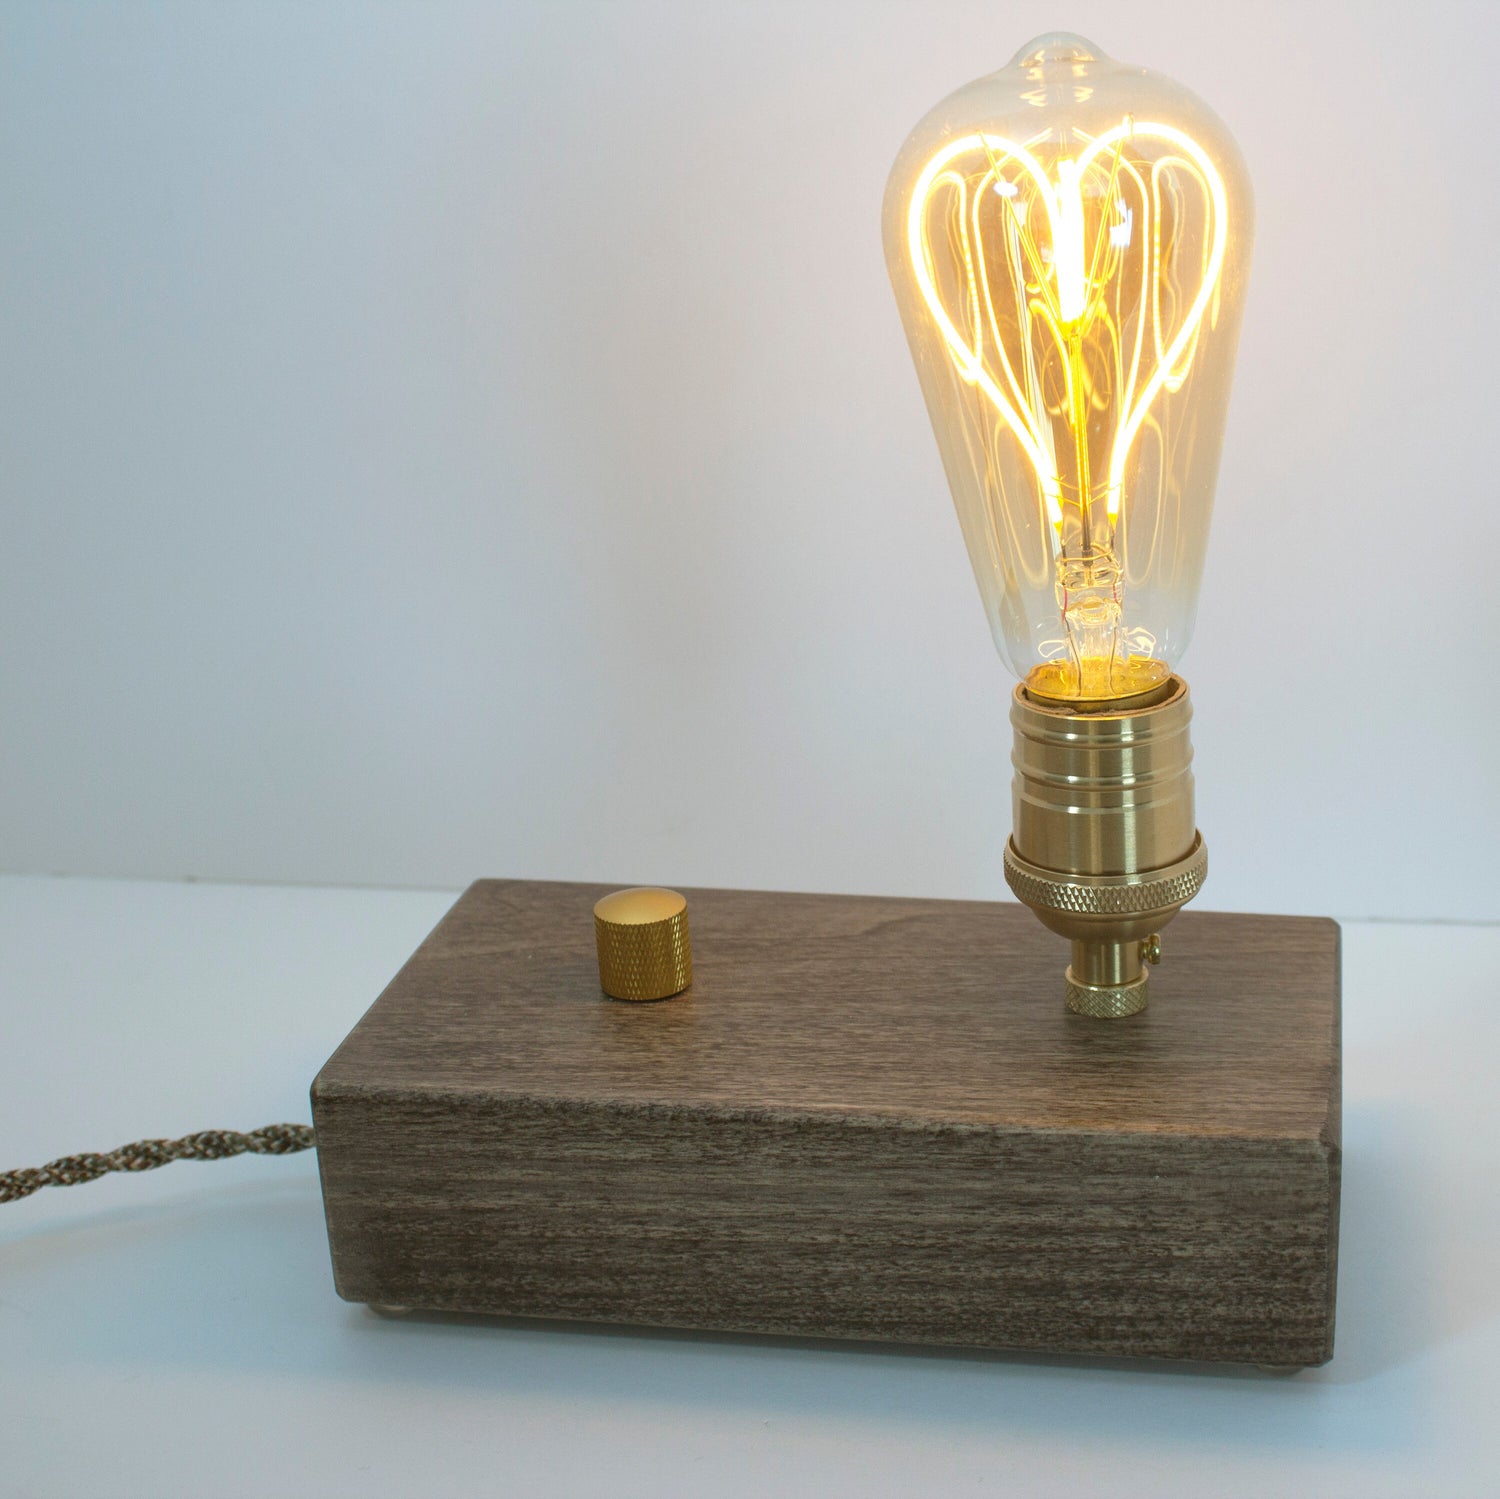 Edison Bulb - Table Lamp with Wood Block dimmable - wood table or desk lamp for Your Industrial Décor - birthday gift, brass socket